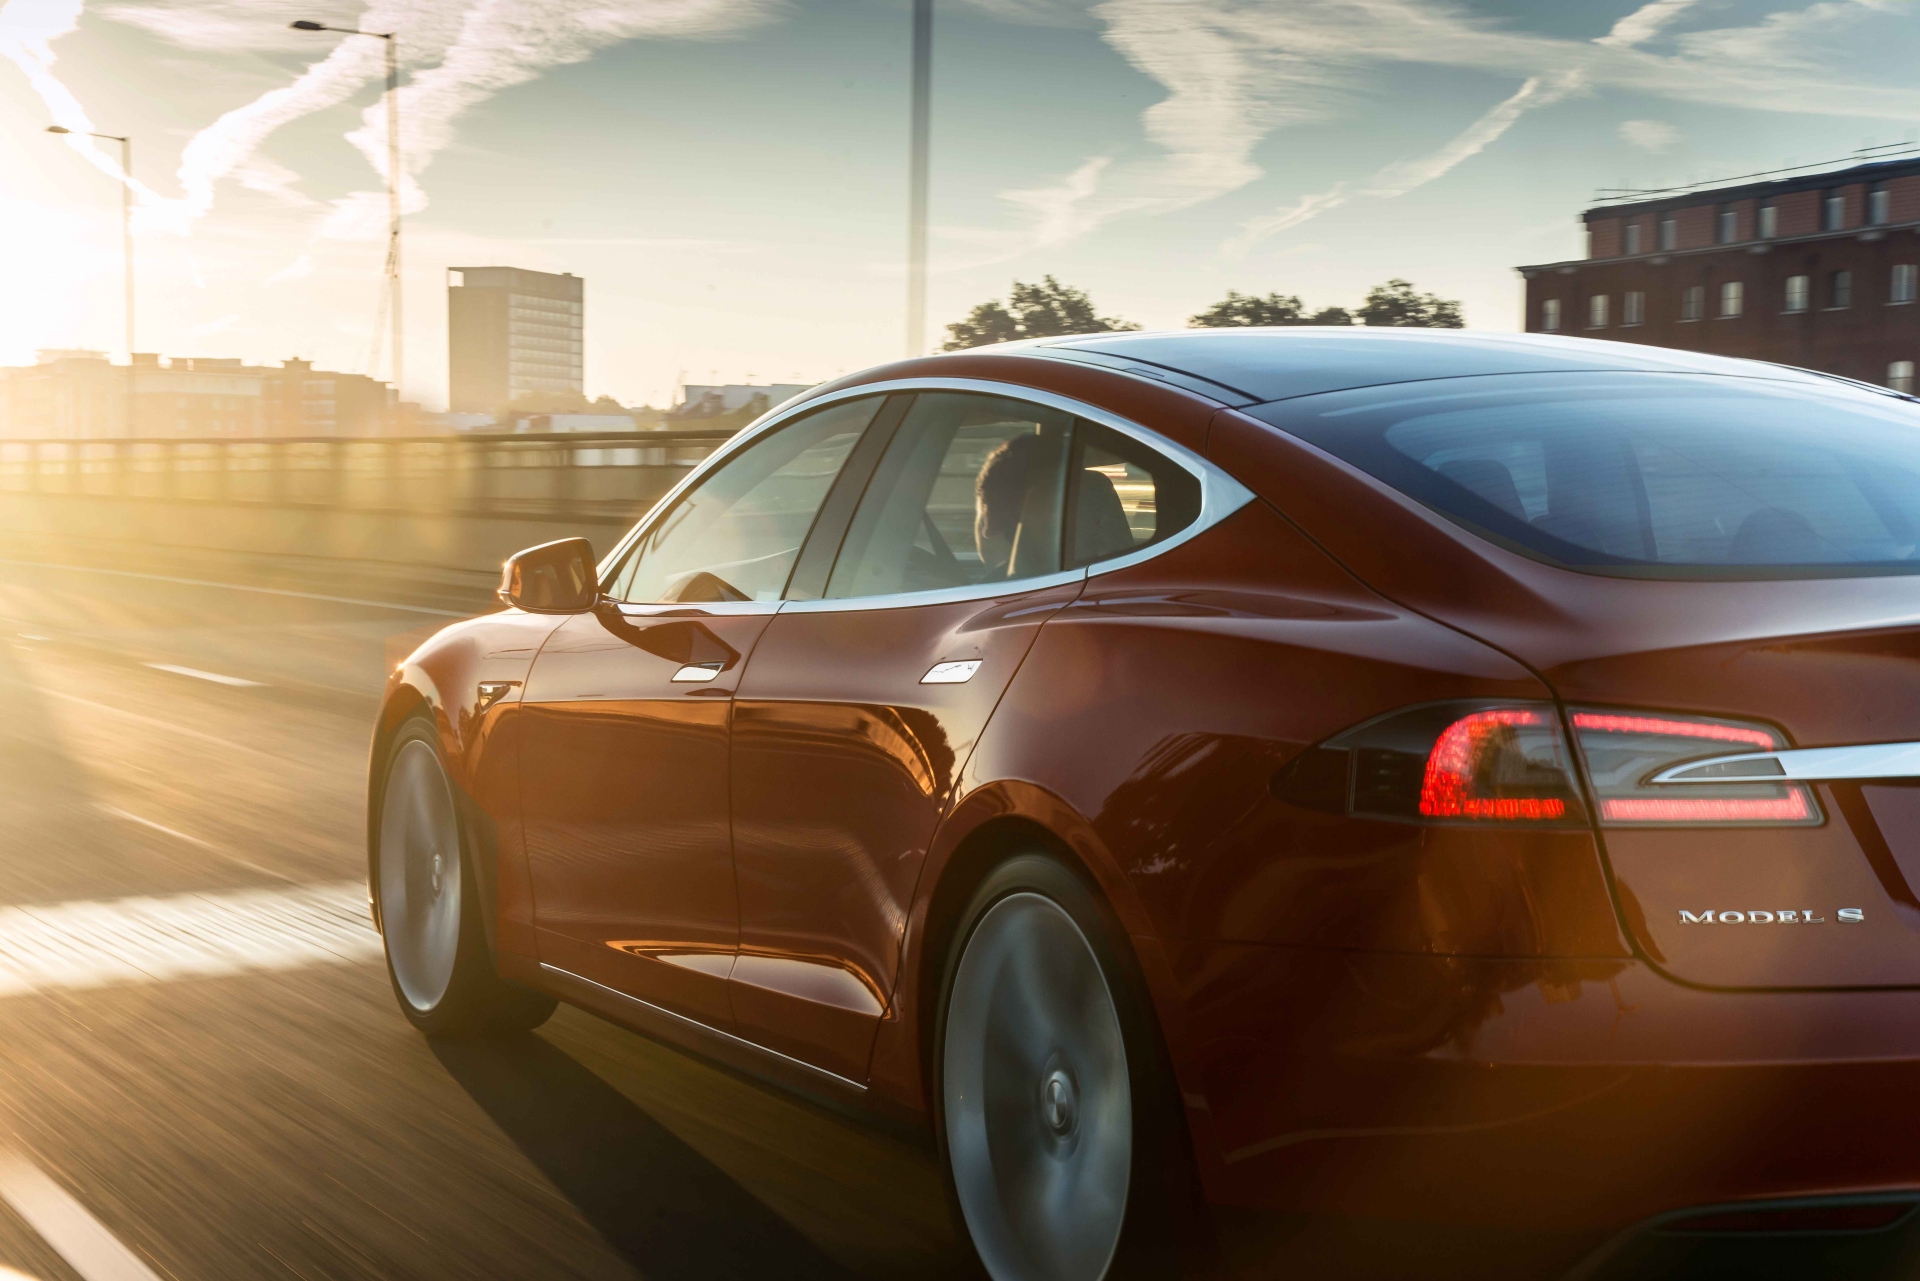 Tesla Model S - Red Exterior - Rear Side View - Green Machine | A Closer Look At Electric Cars And Hybrid Vehicles